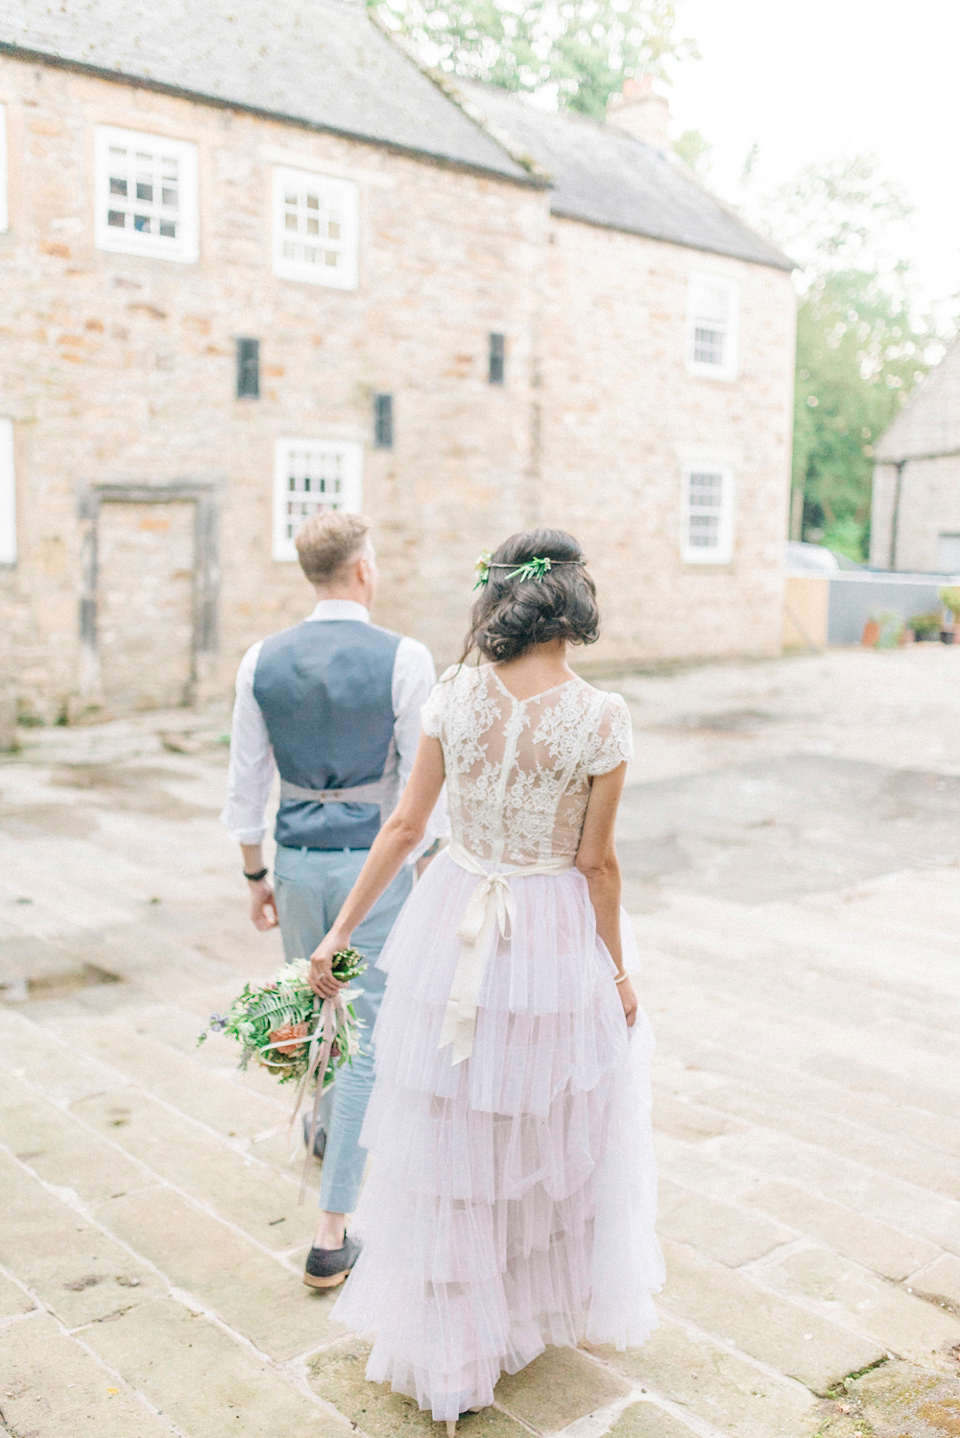 Bride Laura wore a tiered wedding dress by Katya Katya Shehurina for her peach wedding at Lartington Hall in Teesdale. Photography by Sarah Jane Ethan.